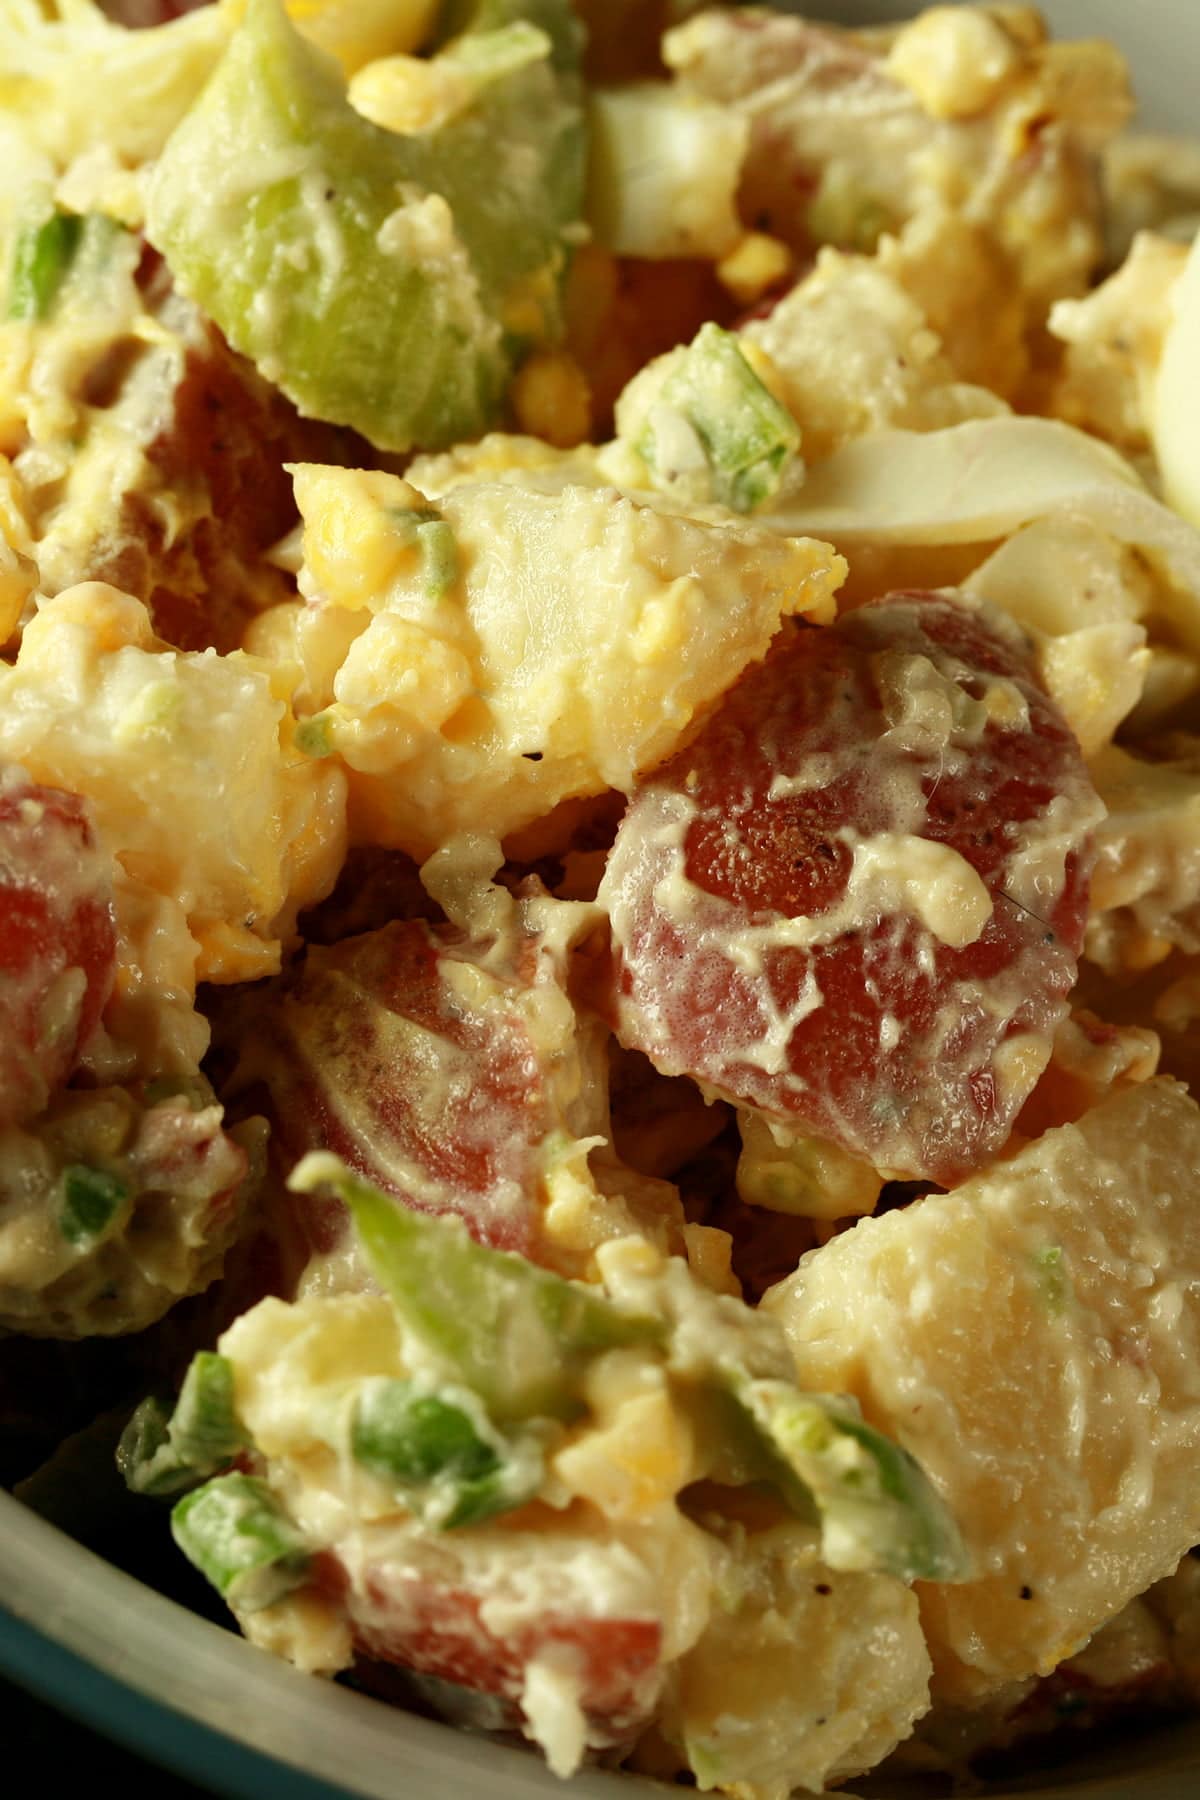 A bowl of a creamy cold-smoked potato salad. Chunks of red potatos, celery slices, and hard boiled egg are all visible.